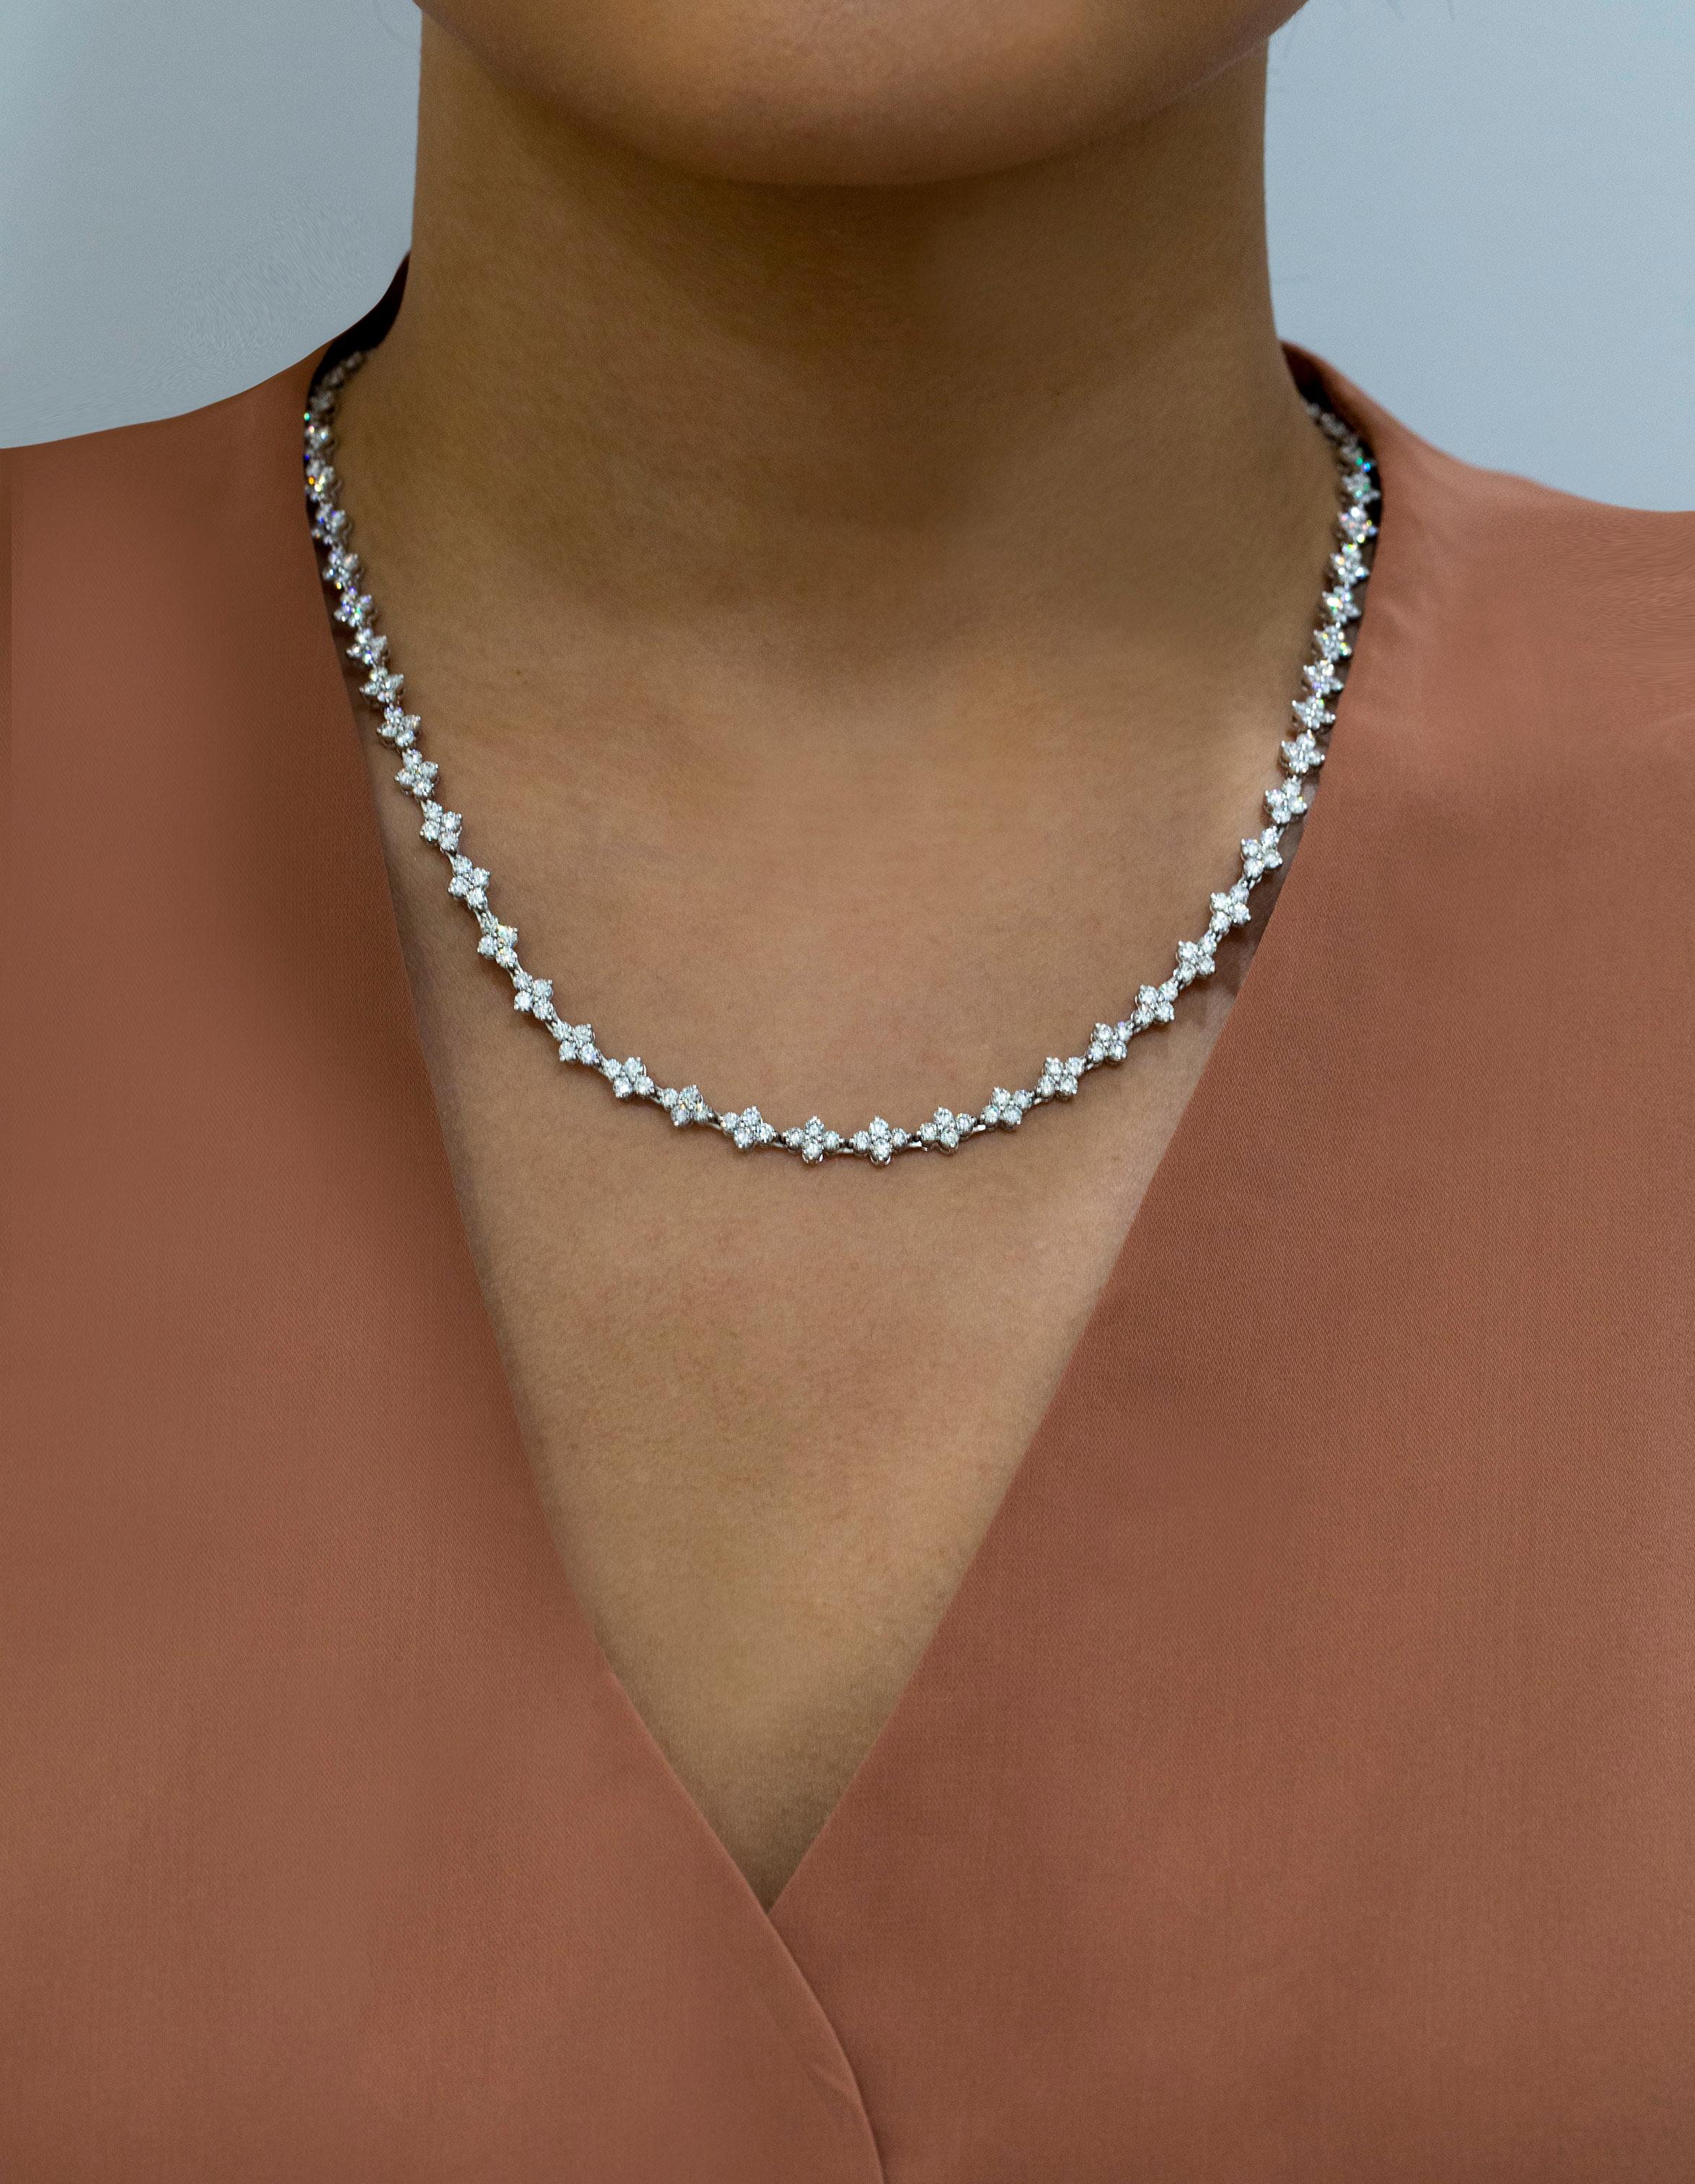 Round Cut Roman Malakov 10.99 Carat Total Diamond Tennis Necklace in White Gold For Sale